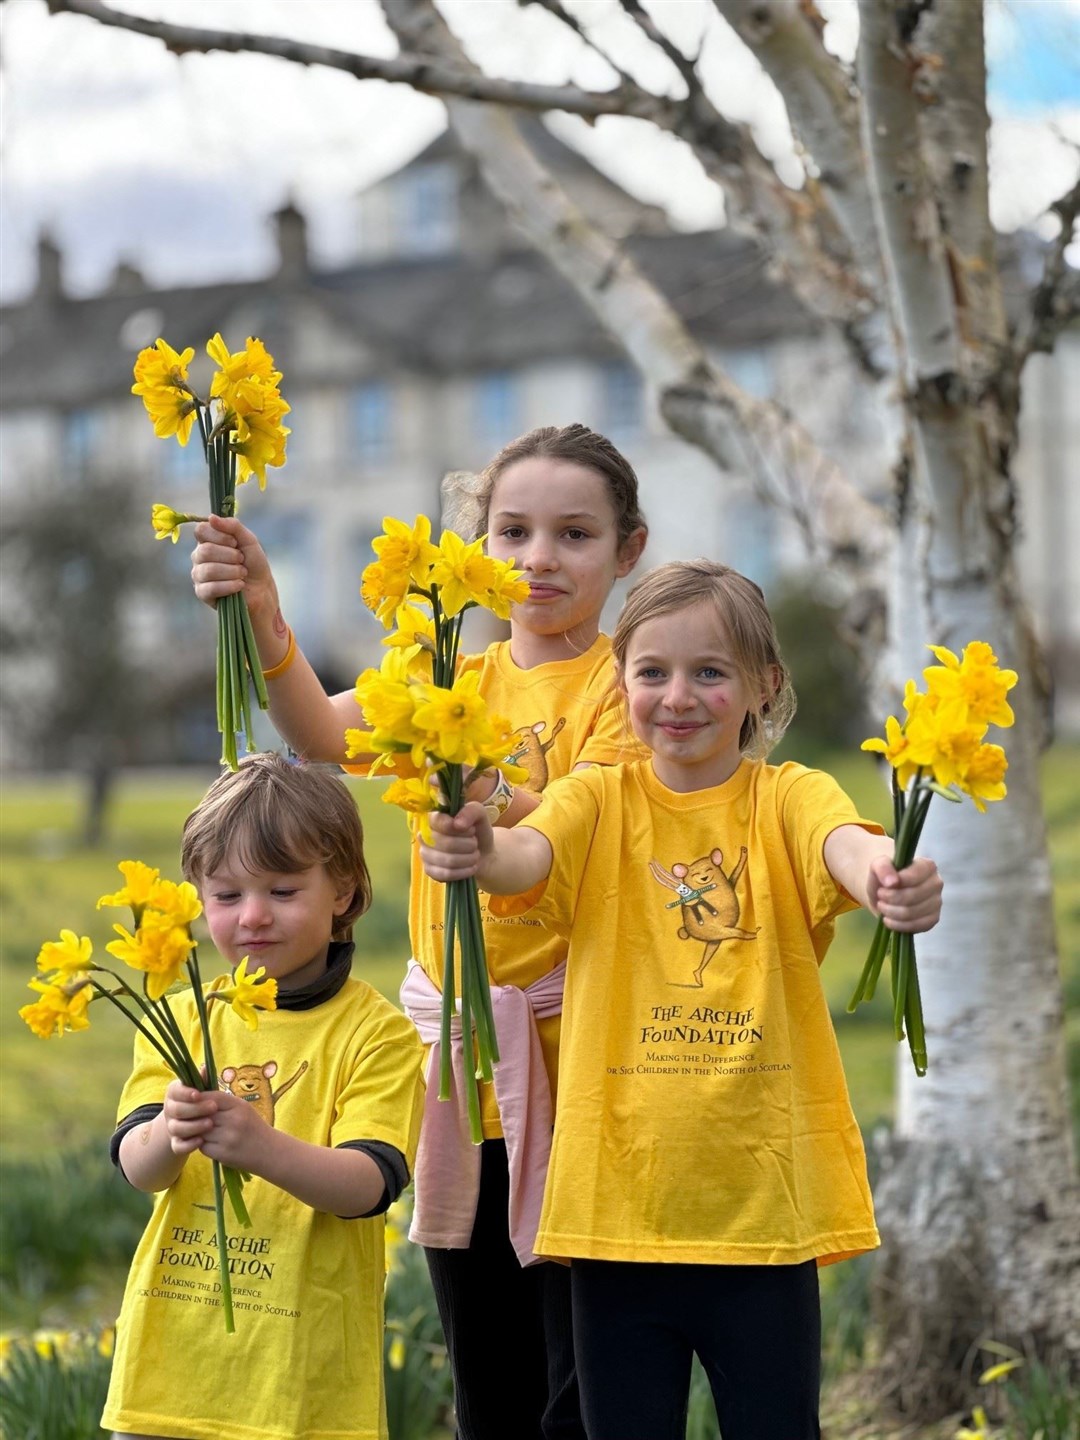 The grandchildren of the Munro family at Foulis Castle ahead of the Daffodil tea on April 15. Leila Munro (11), Sula Blake (8) and Ulysses Munro (5).